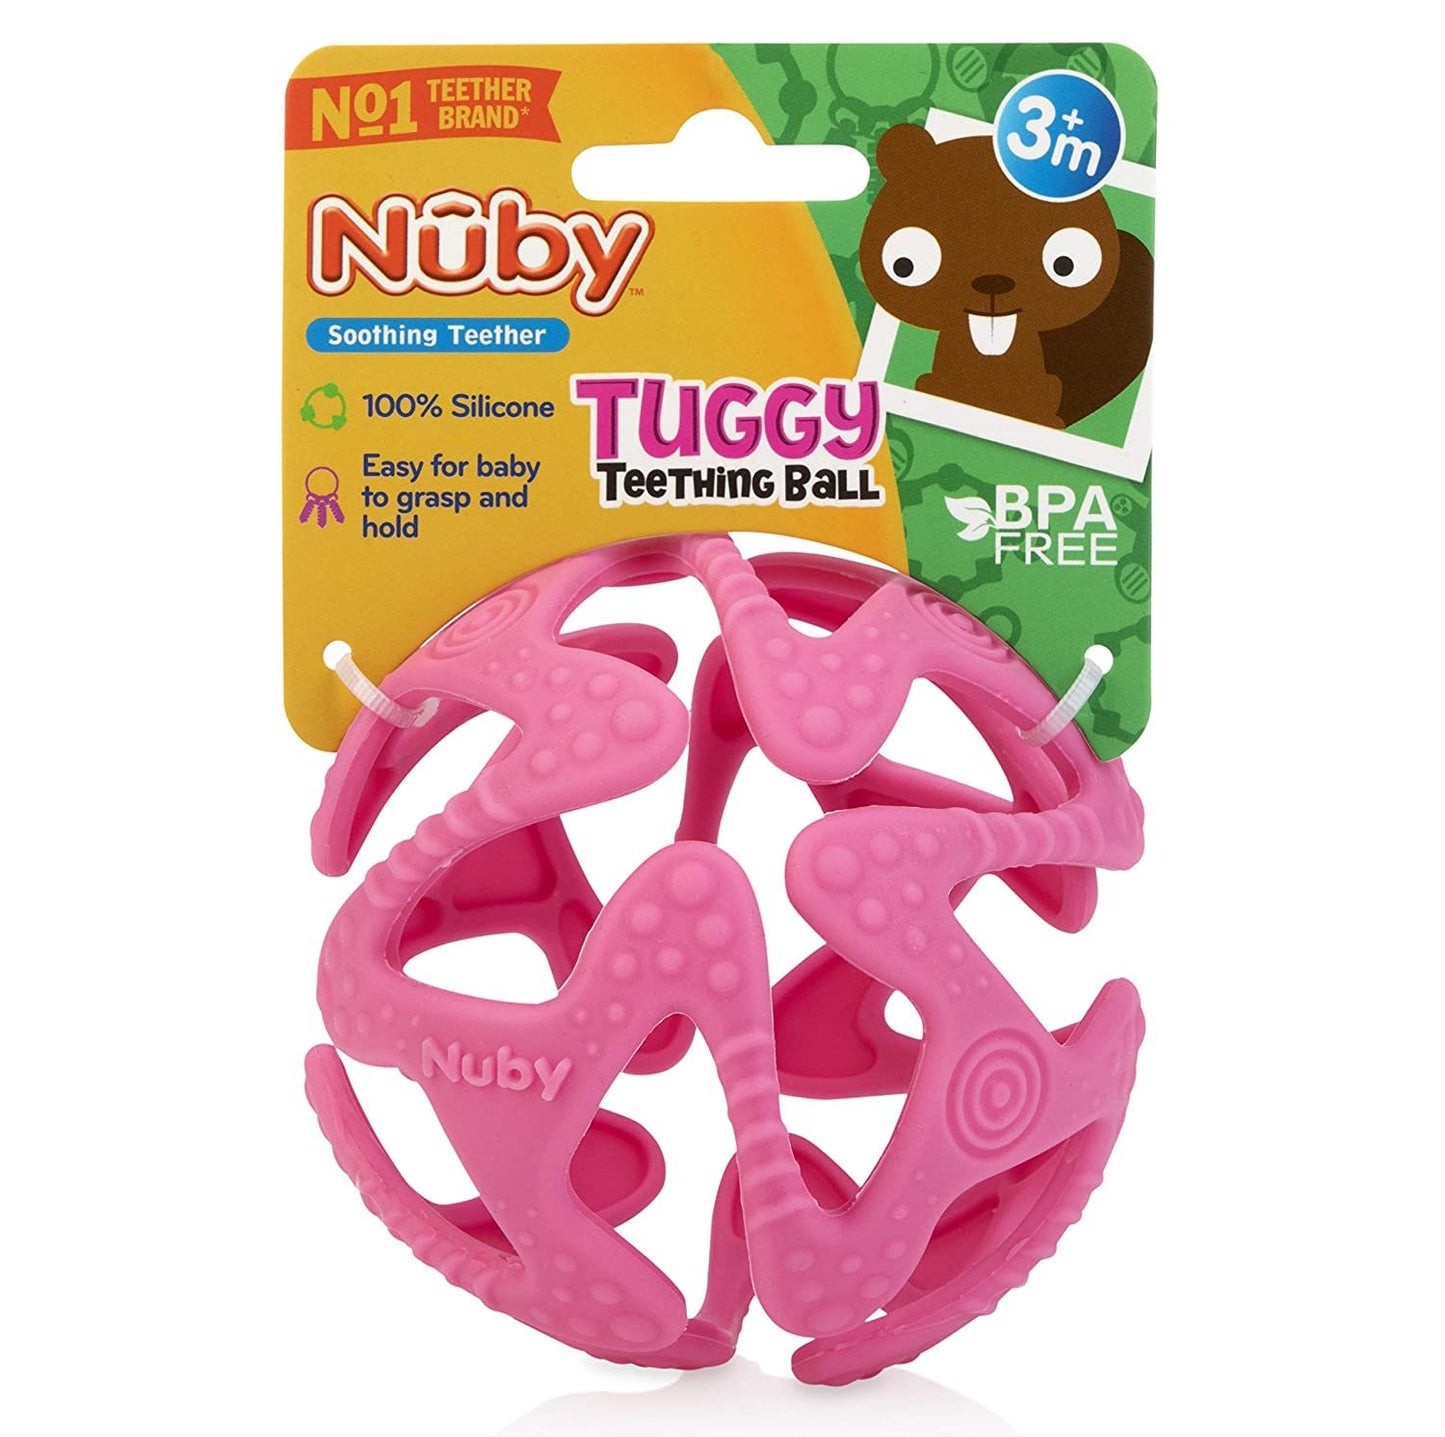 Nuby 100% Silicone Tuggy Teether Ball, 6 Months +, Colors May Vary